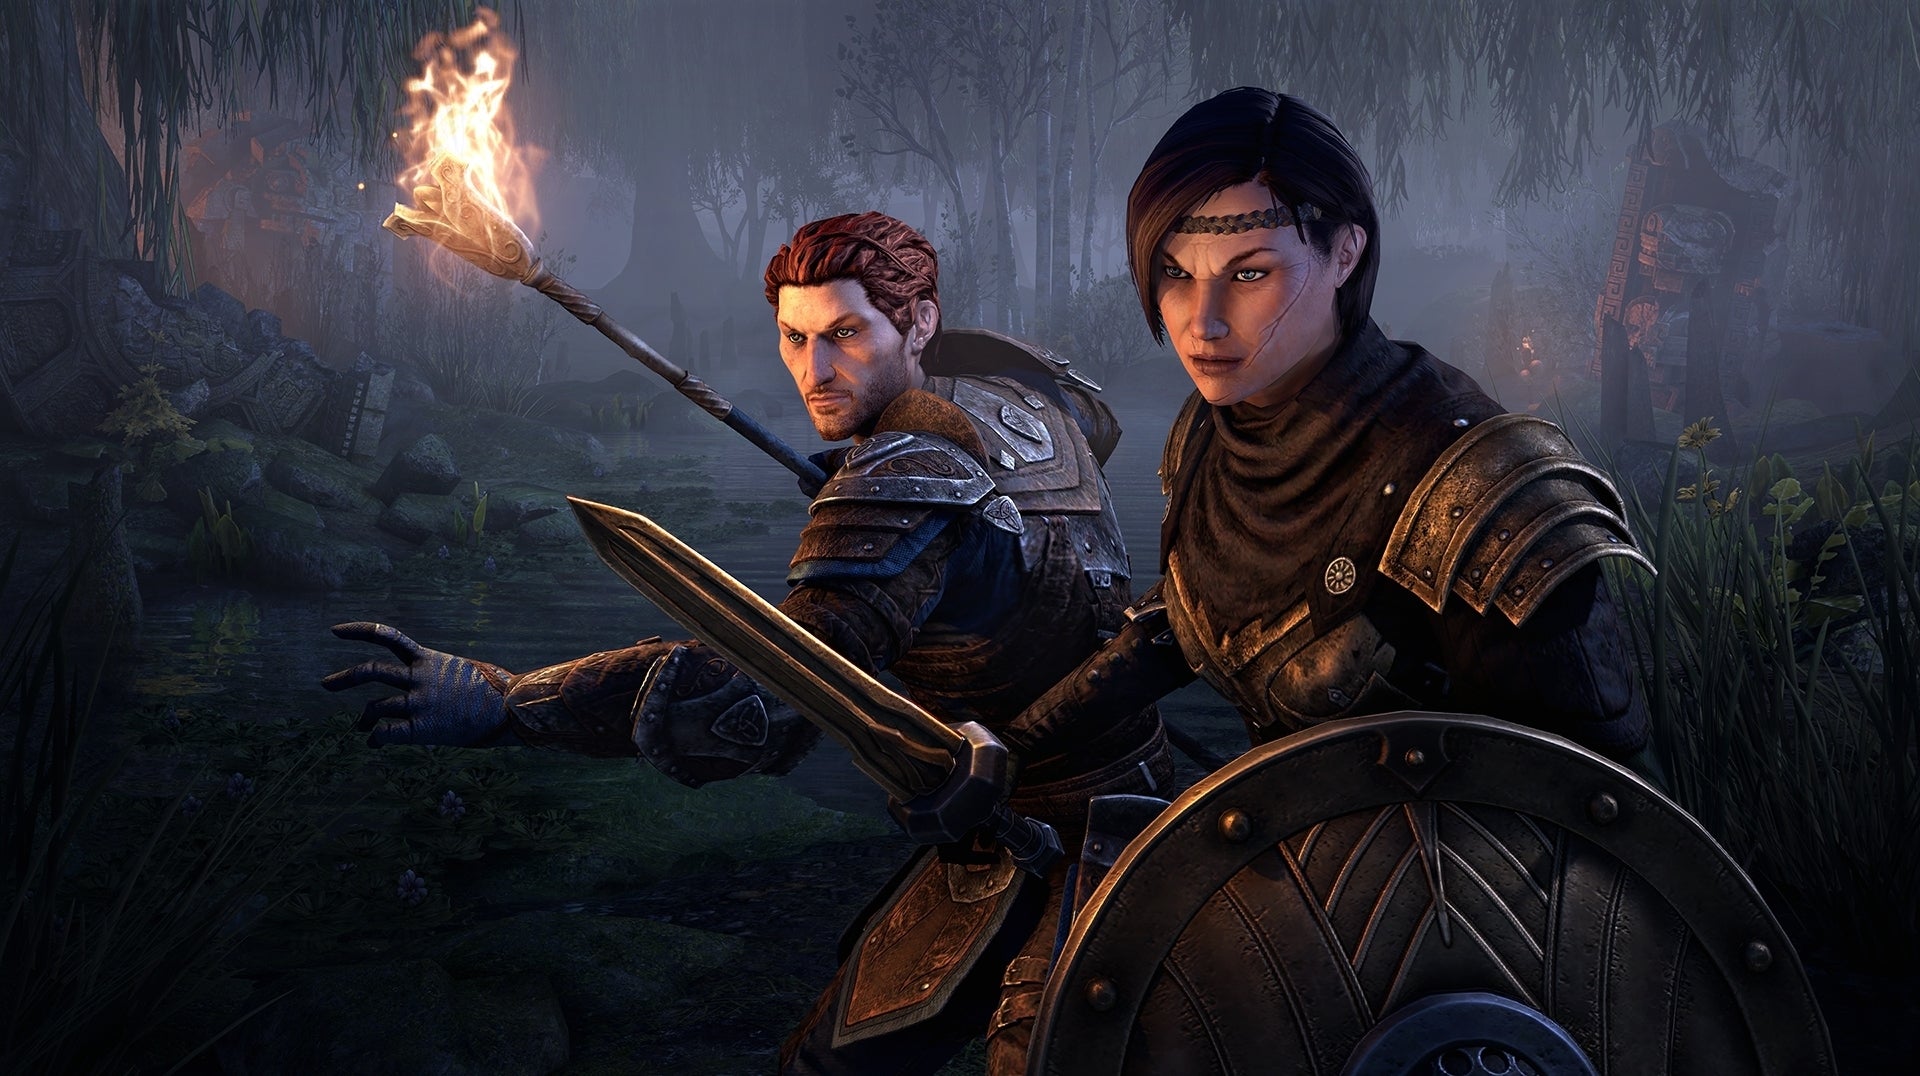 Image for The Elder Scrolls Online: Blackwood is set 800 years before Oblivion, adds companions